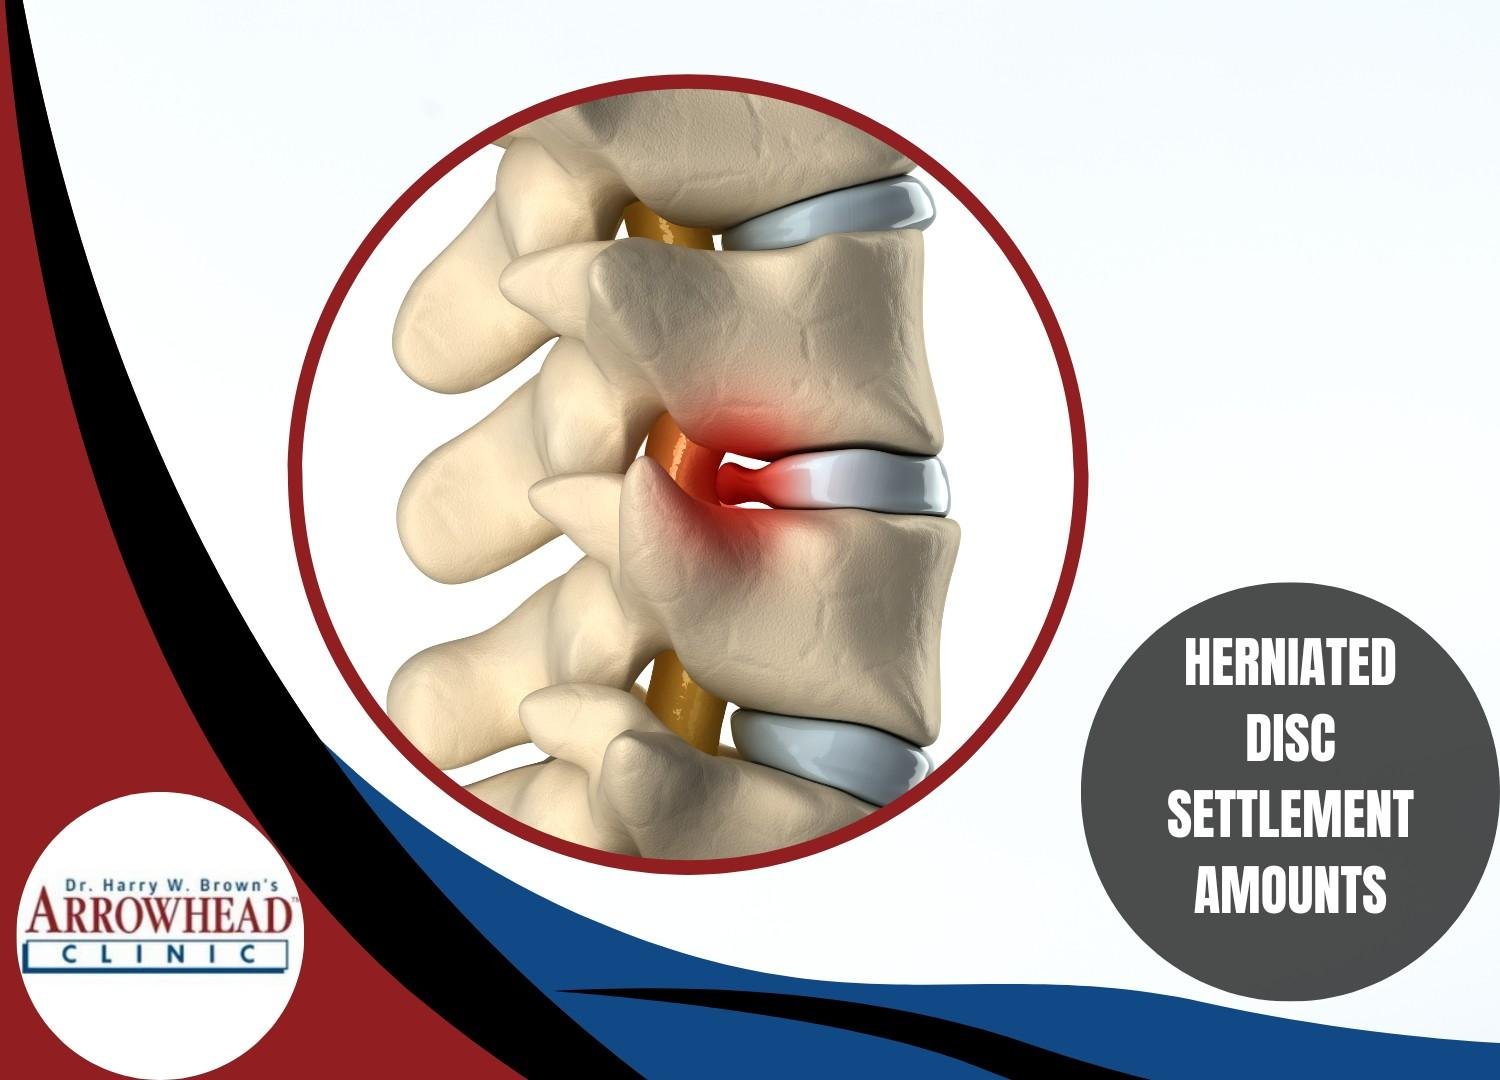 herniated disc injury from auto accident